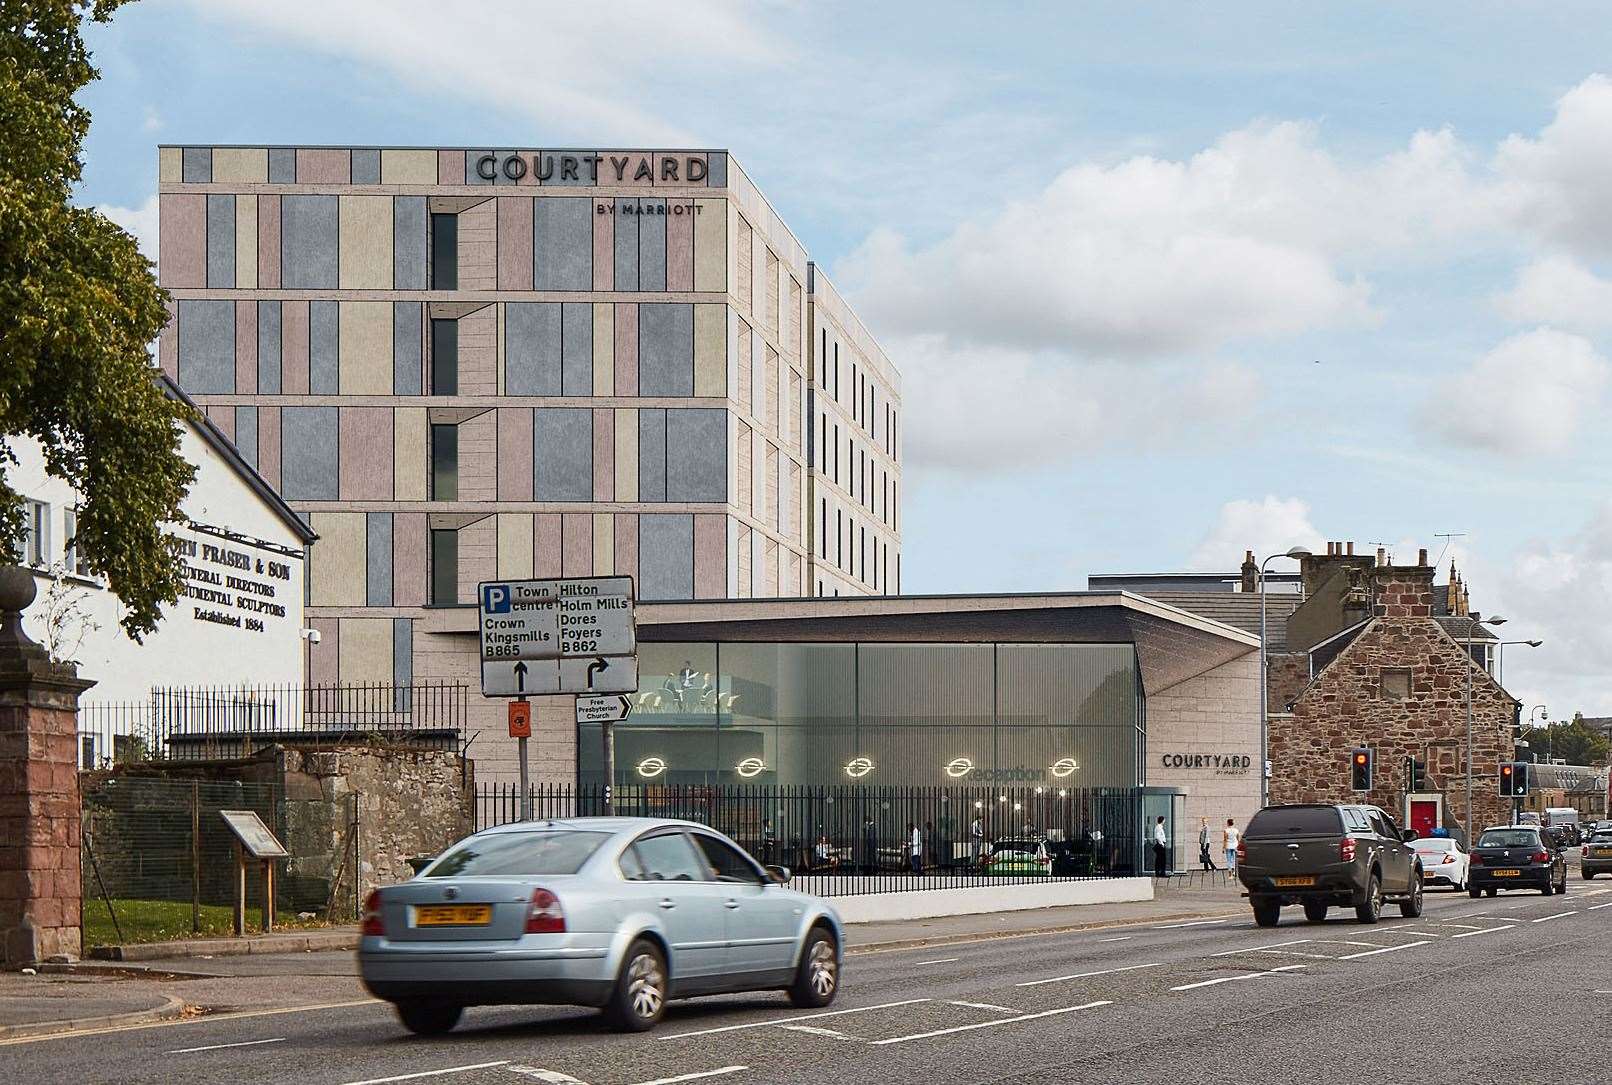 An artist’s impression of the proposed Courtyard by Marriott Hotel in Academy Street.